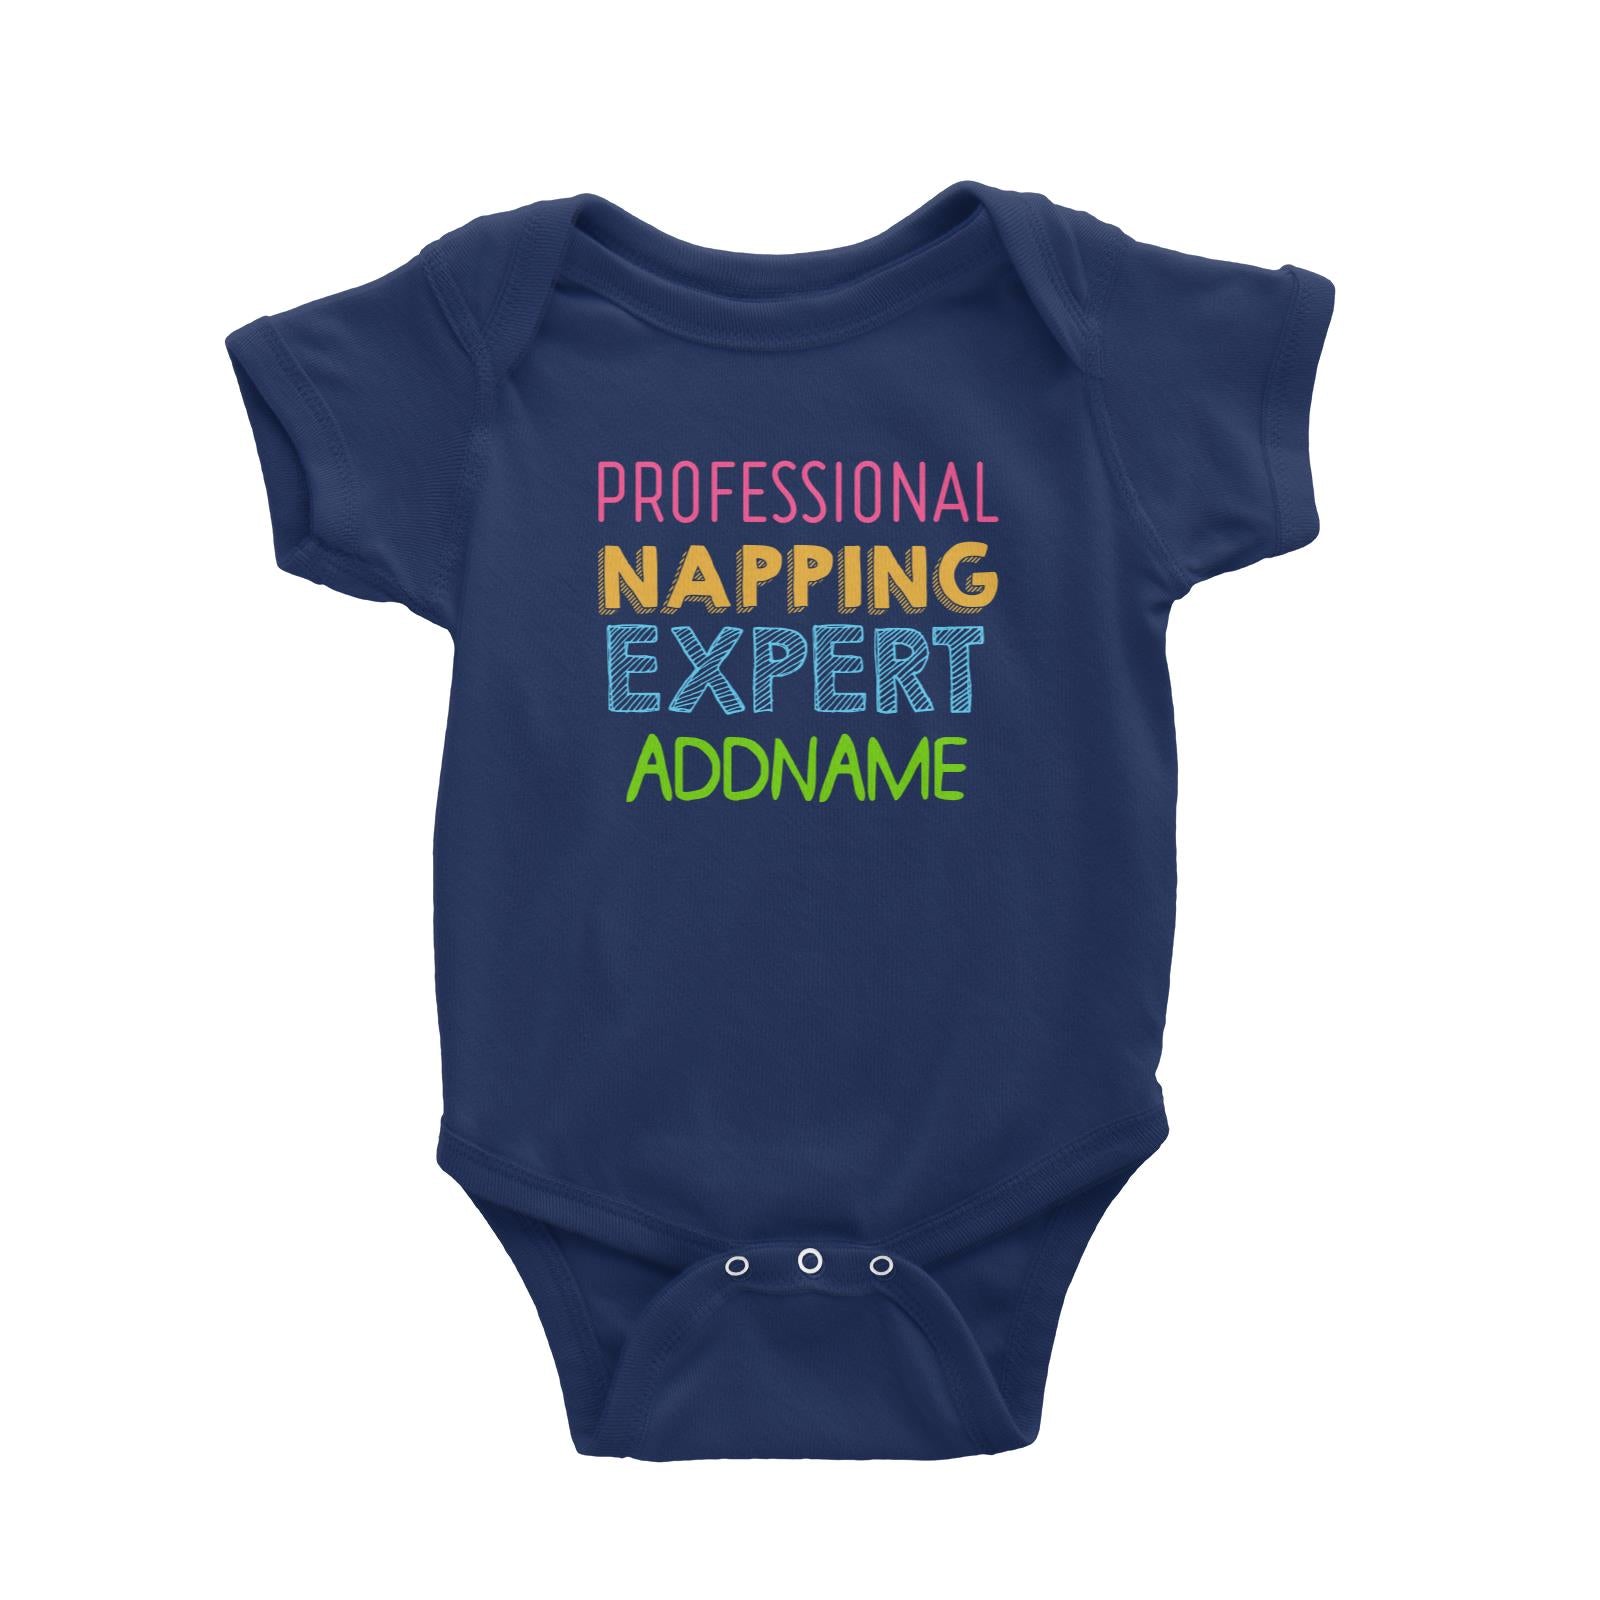 Professional Napping Expert Addname Baby Romper